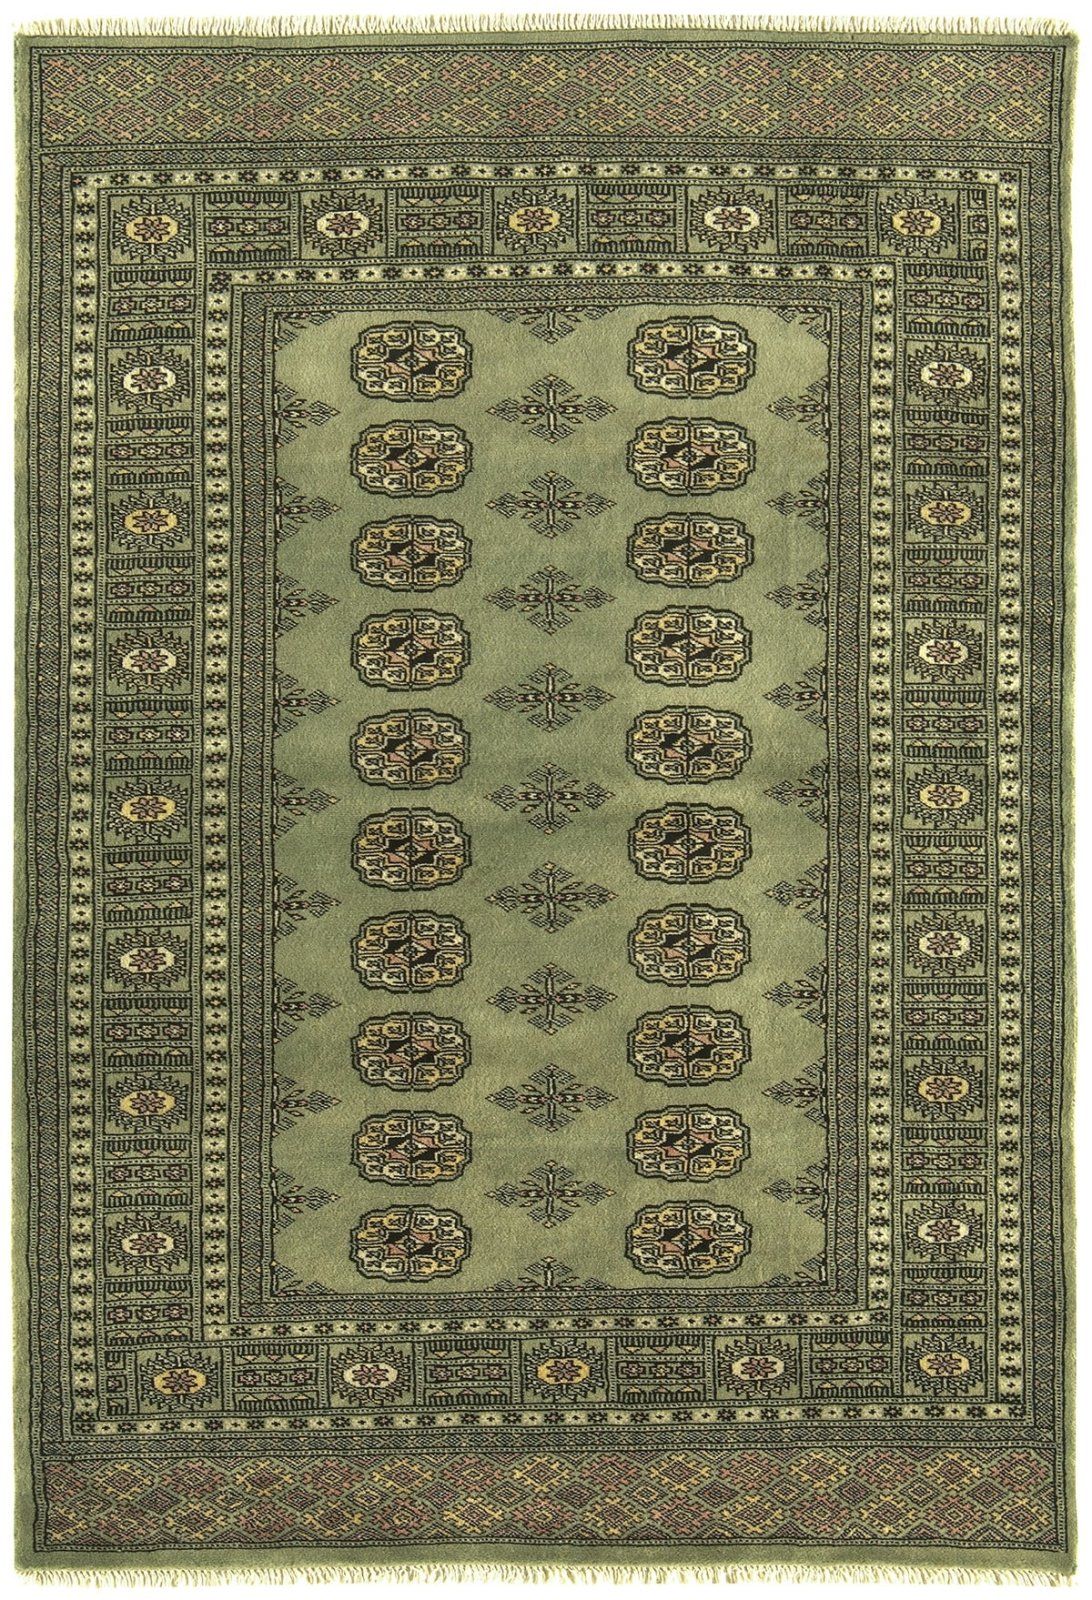 Guide to bokhara rugs